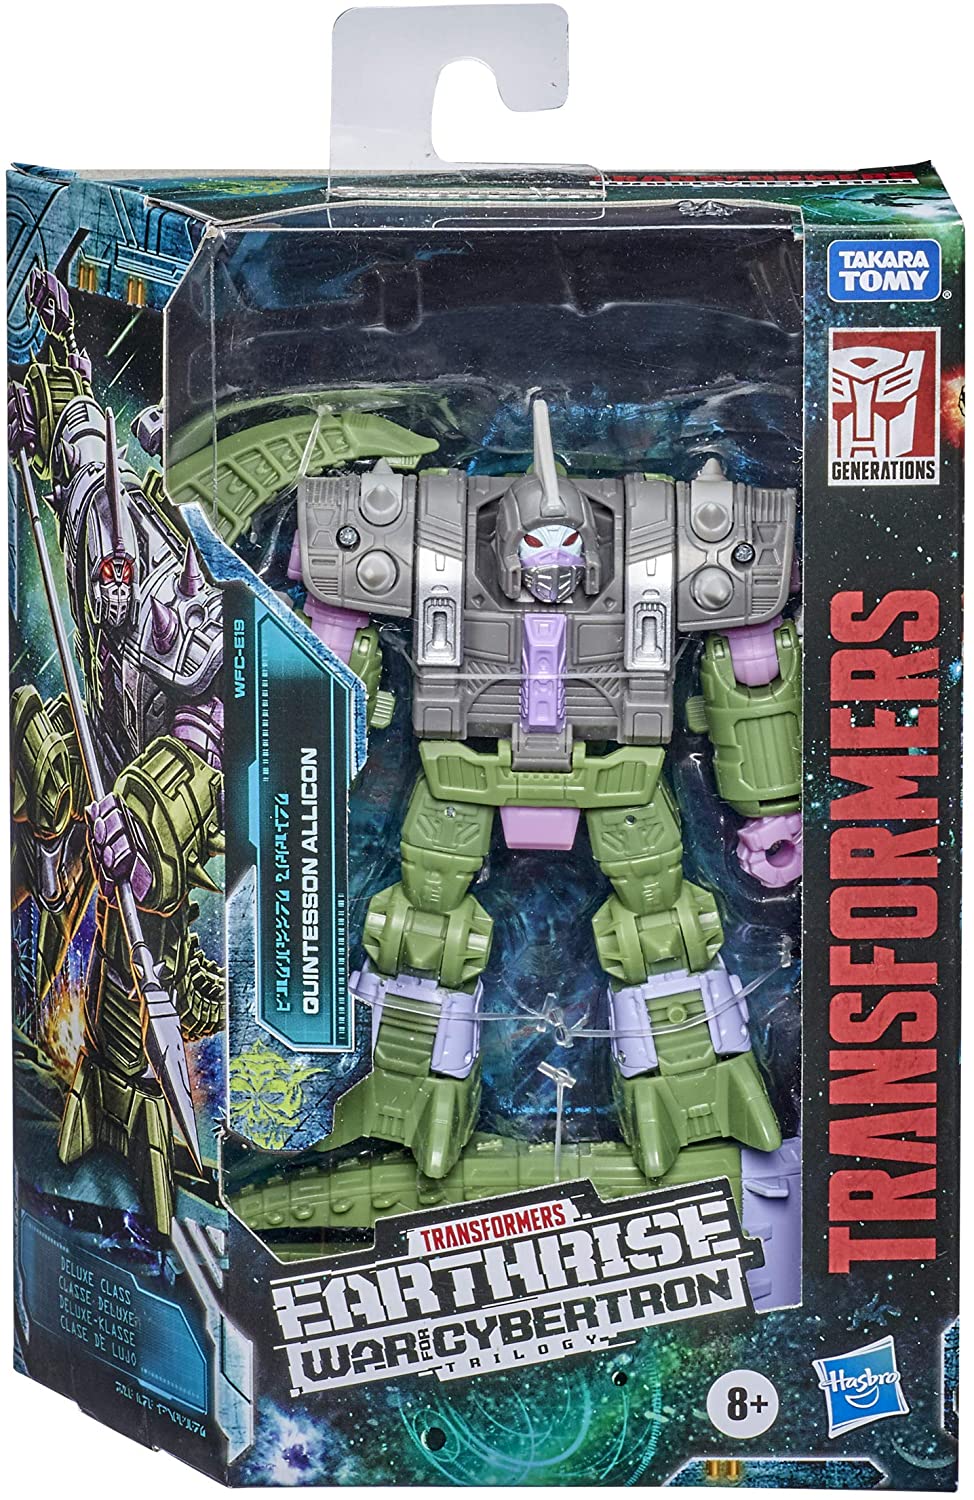 Transformers Earthrise: War for Cybertron Figures